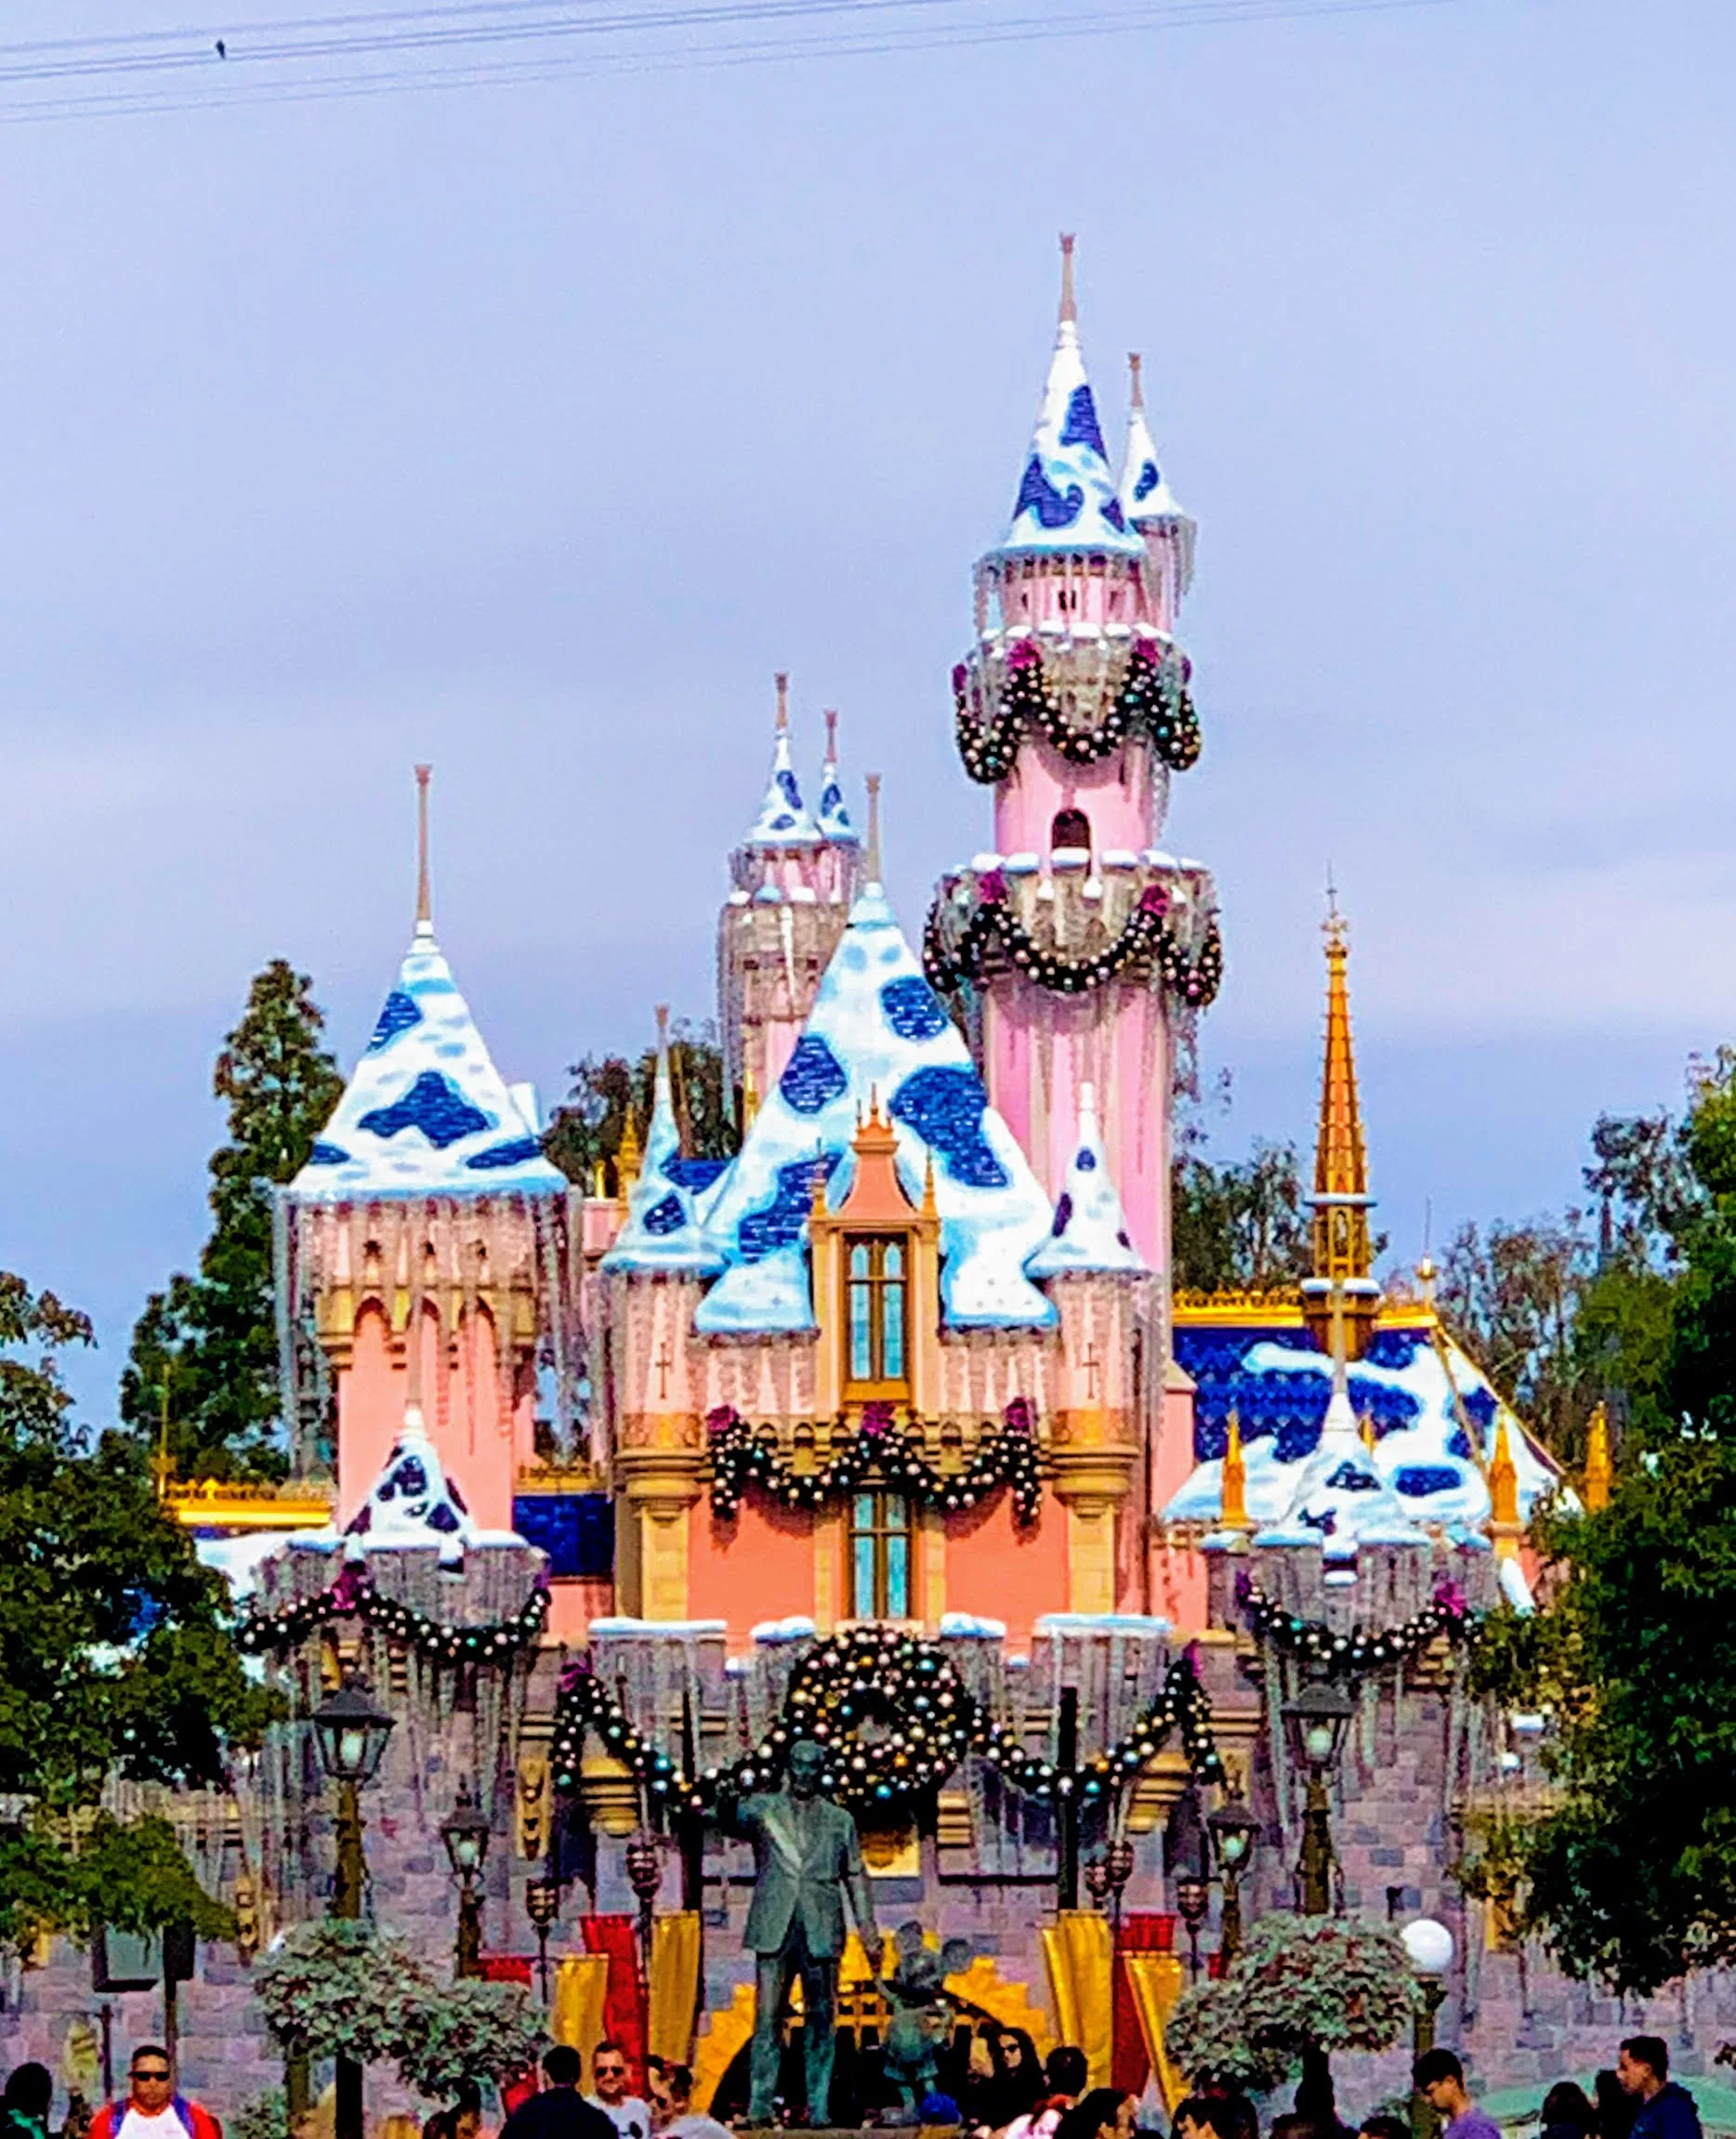 Sleeping Beauty Castle with snow and Christmas decorations. disneyland christmas tips